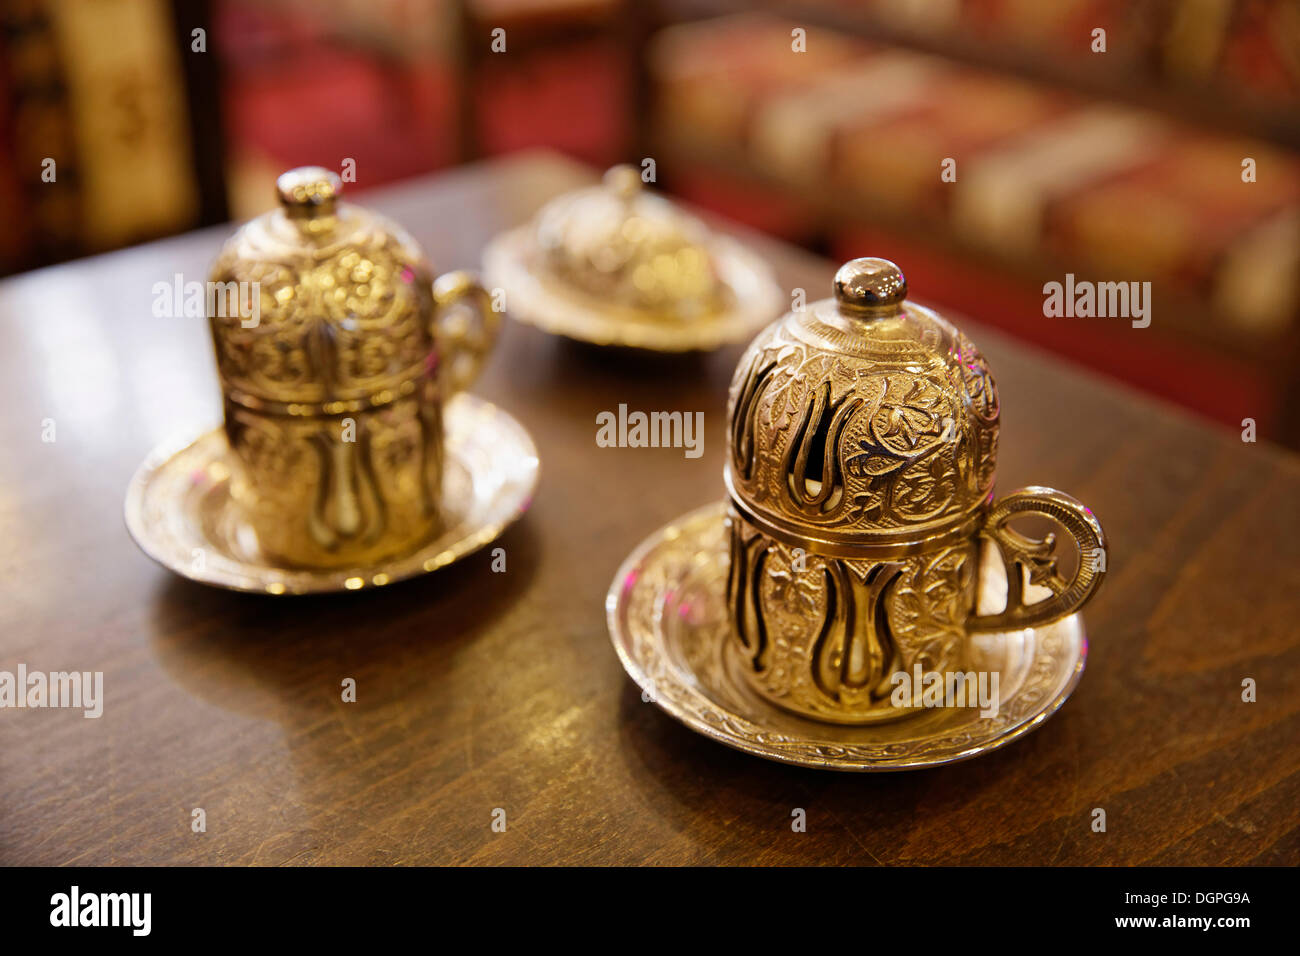 Mocha, Turkish coffee in traditional golden cups, Old City Sultanahmet, Istanbul, Turkey, Europe Stock Photo